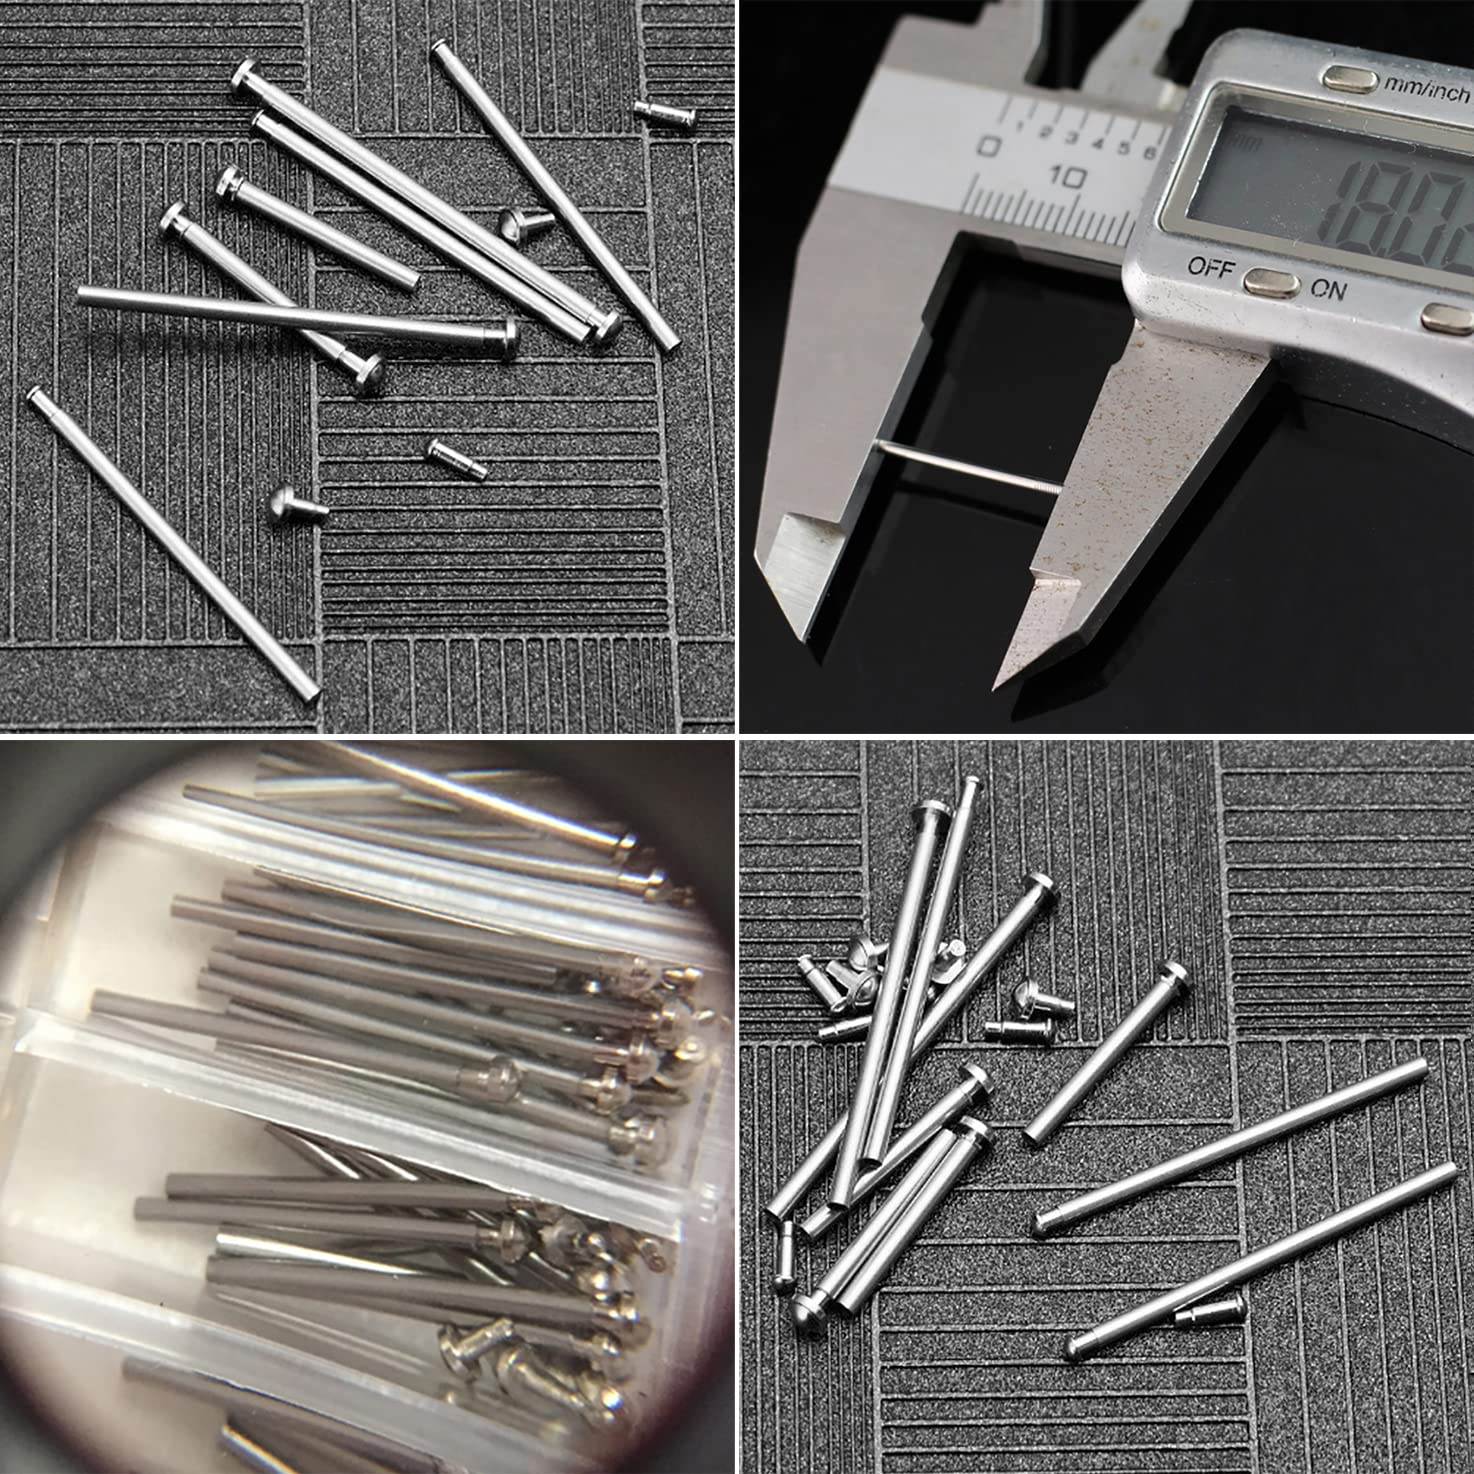 Nice Pies Stainless Watch Pin Friction Strap Pressure Bars With Rivet Ends Watch Repair Tools Size 10mm-28mm